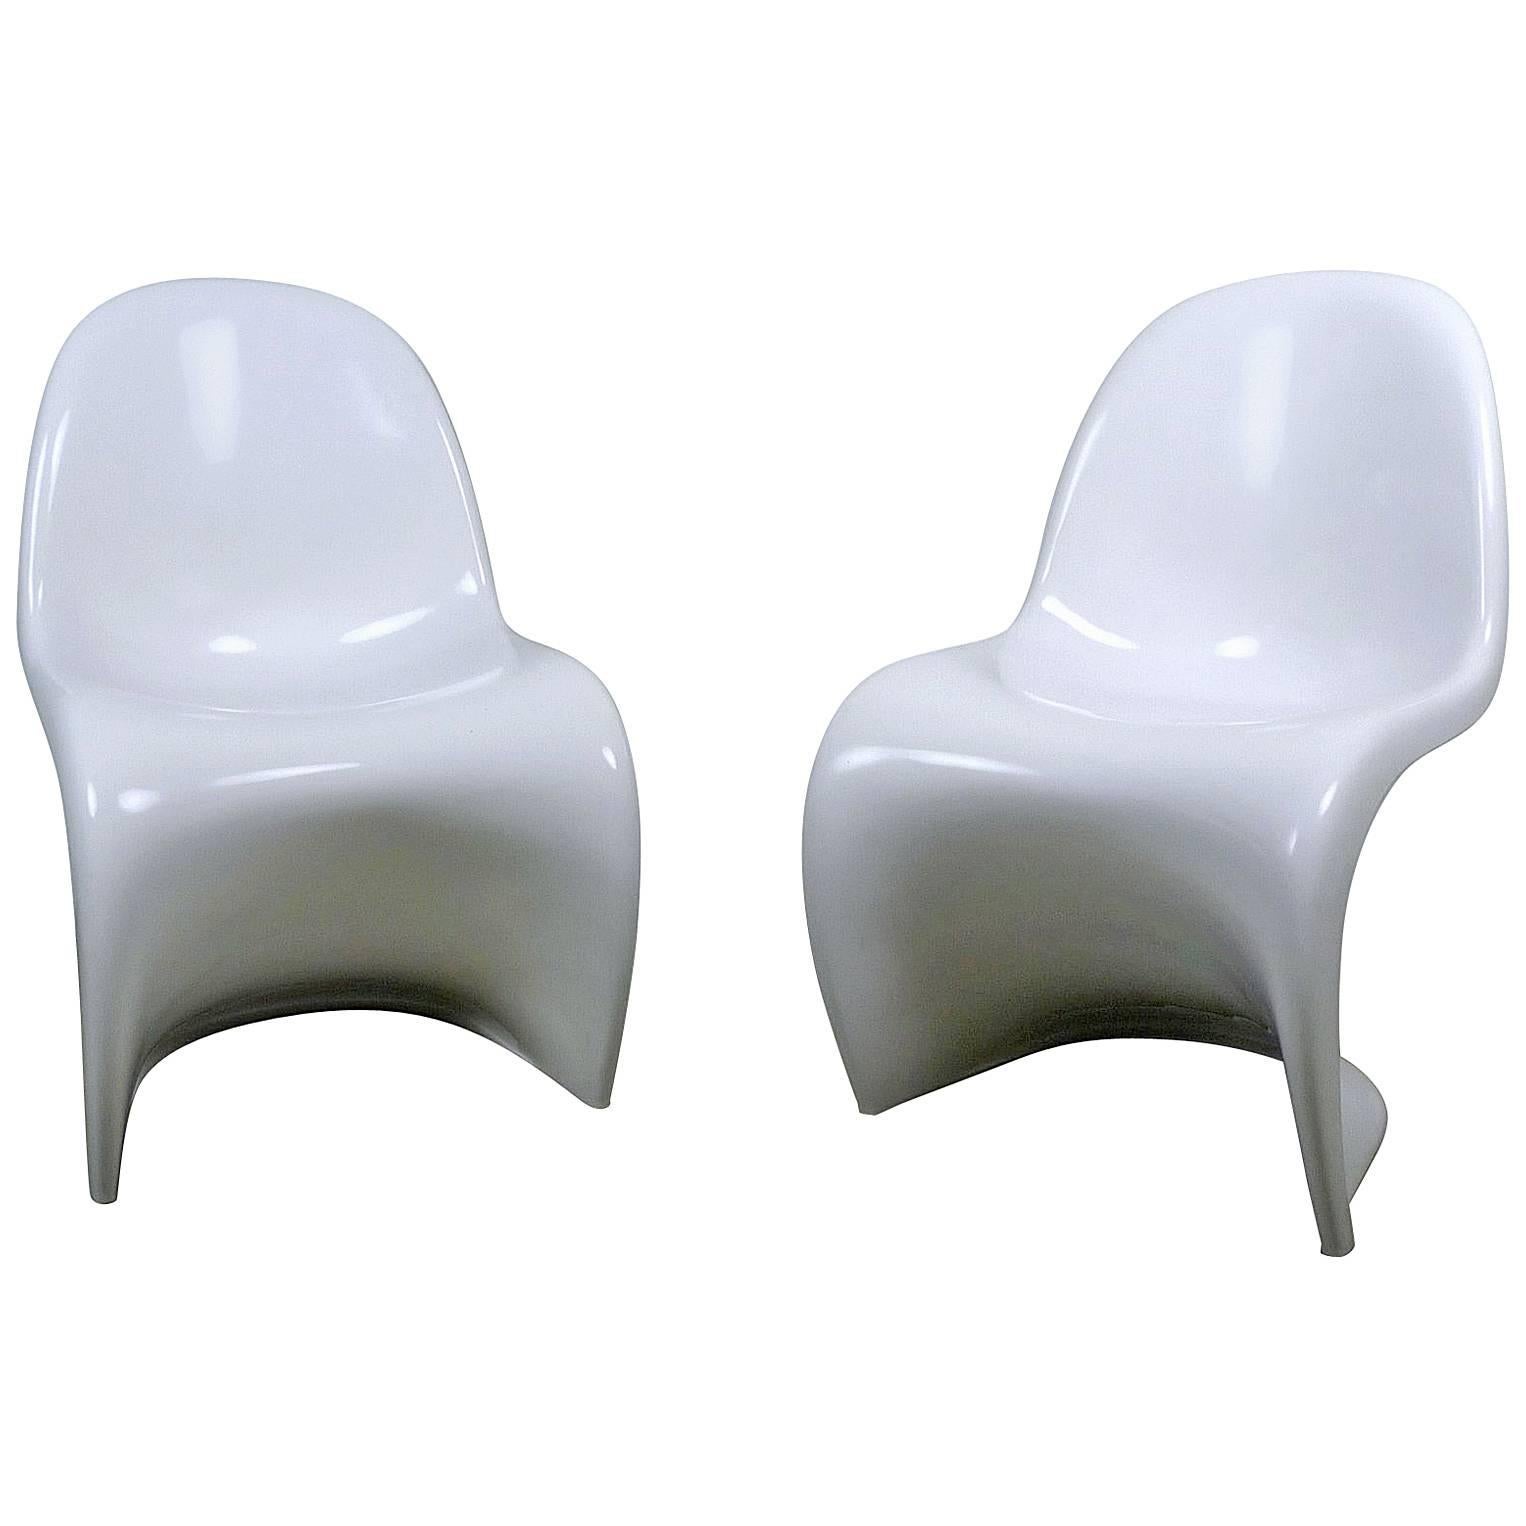 Pair of White Panton Chairs by Verner Panton for Fehlbau from 1971 and 1972 For Sale